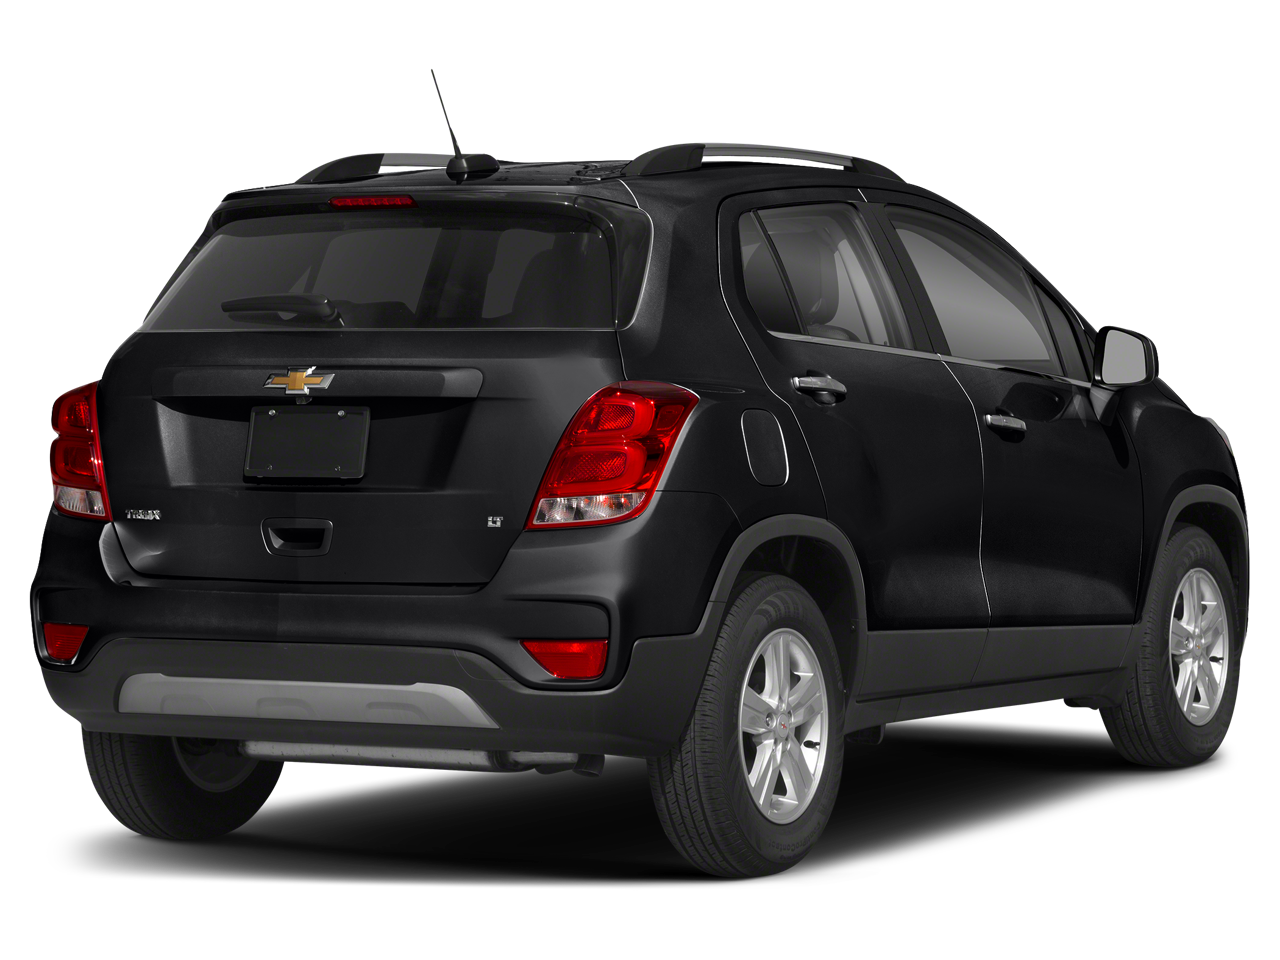 Used 2020 Chevrolet Trax LT with VIN 3GNCJLSB3LL208348 for sale in Lake Jackson, TX